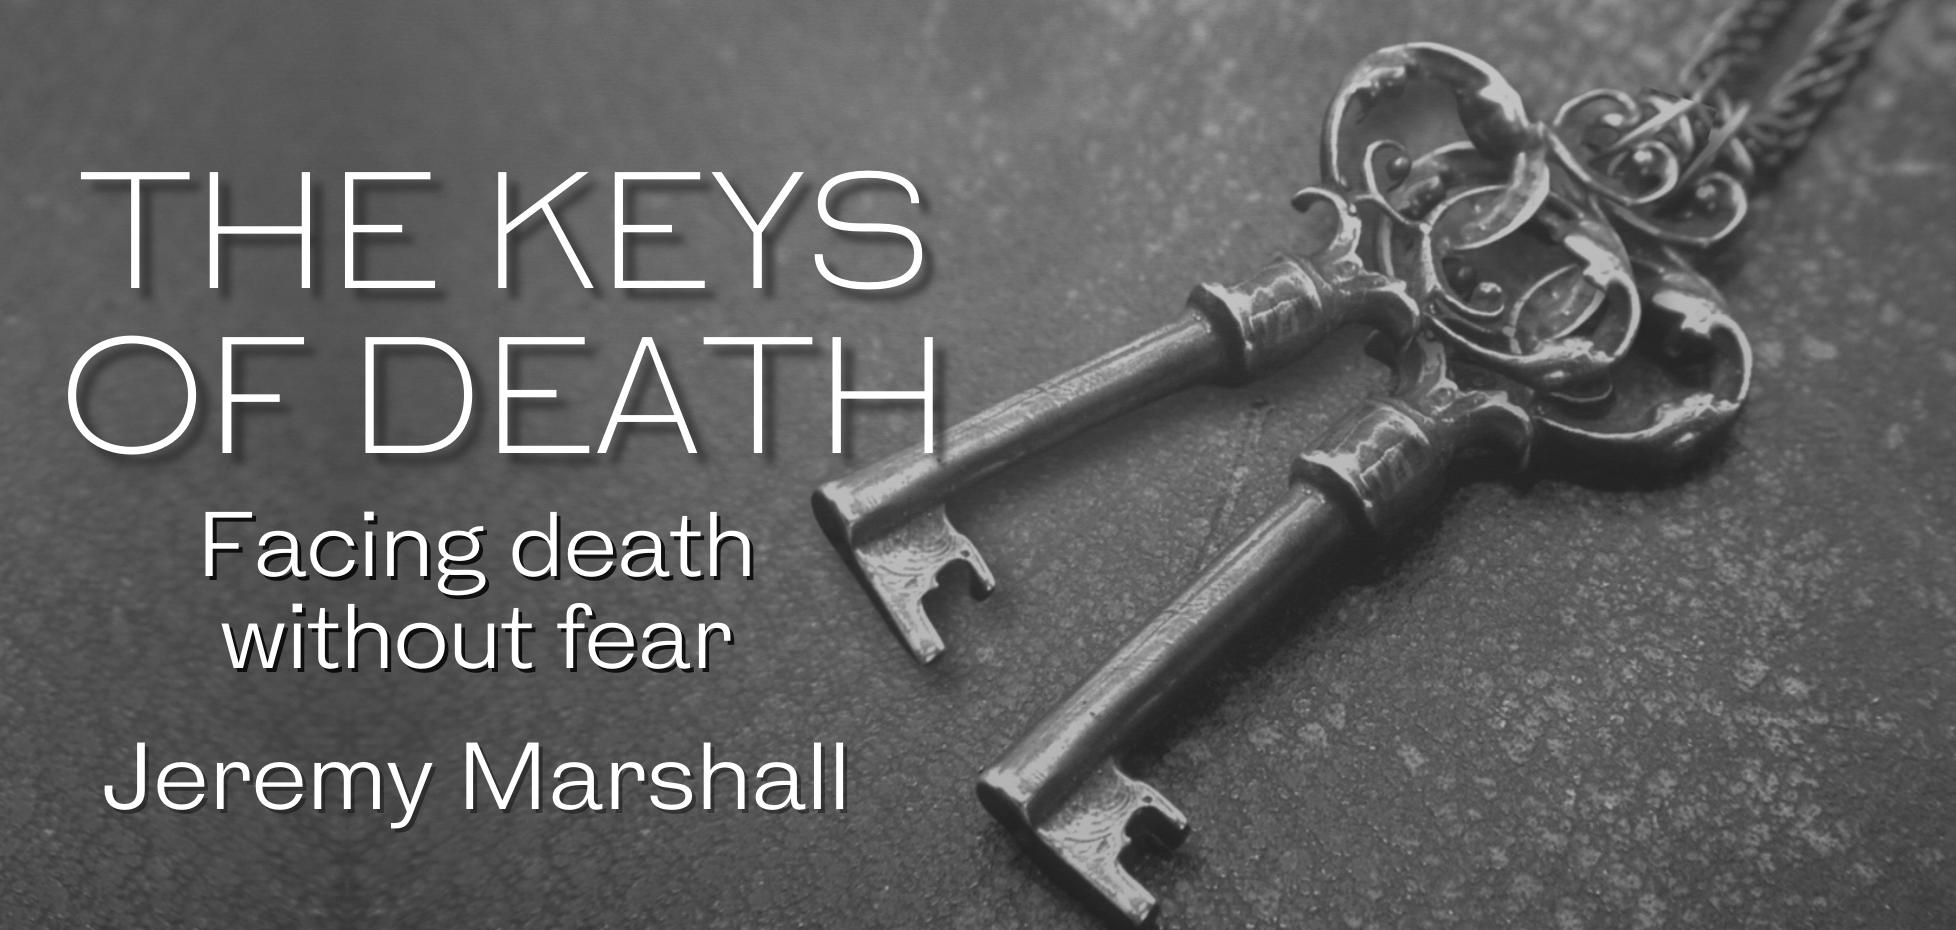 The Keys of Death